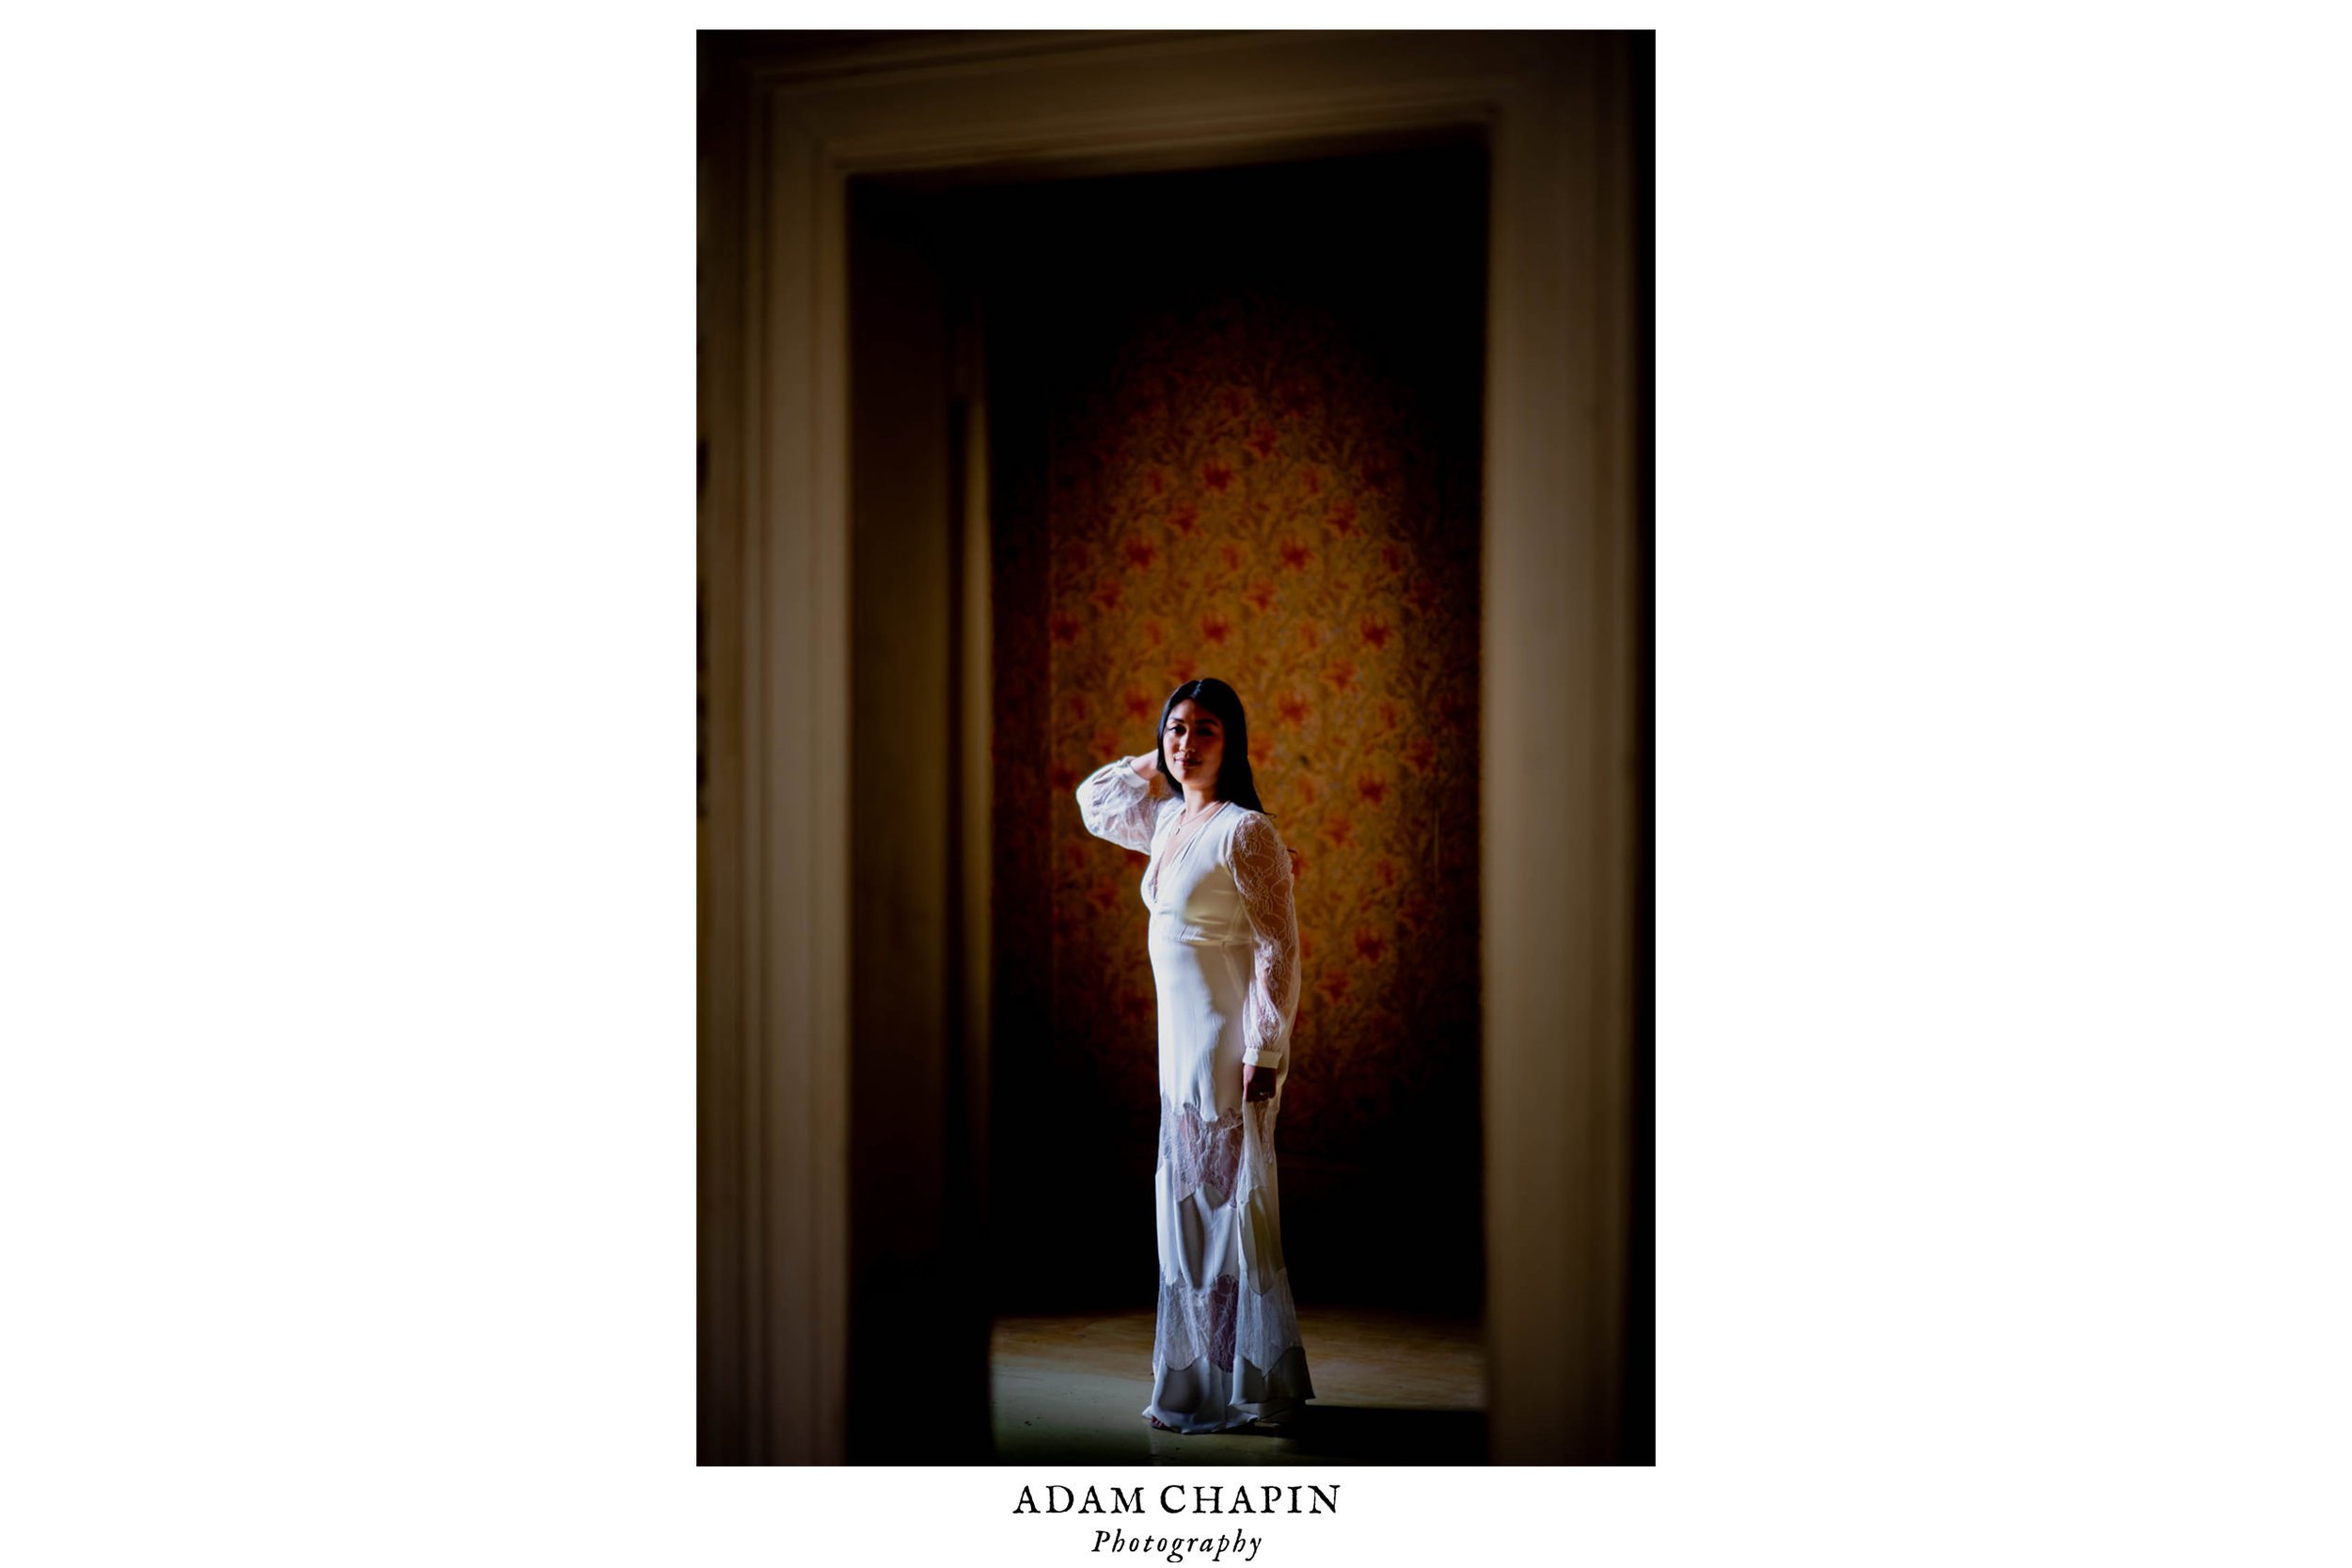 Bride framed by a doorway as she stands in an empty room with ornate wallpaper behind her